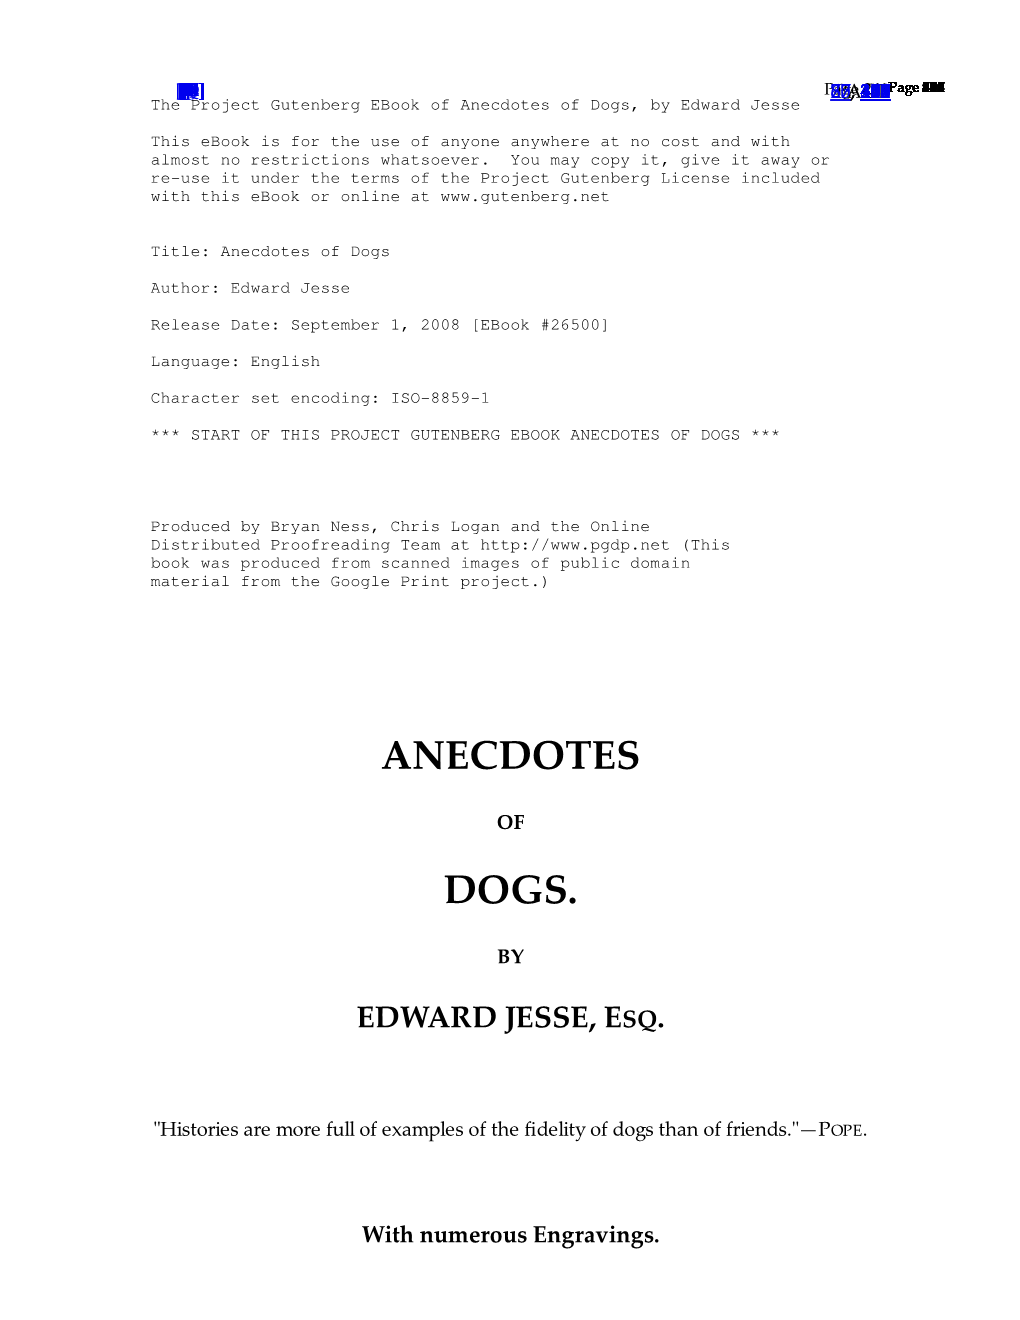 The Project Gutenberg Ebook of Anecdotes of Dogs, by Edward Jesse